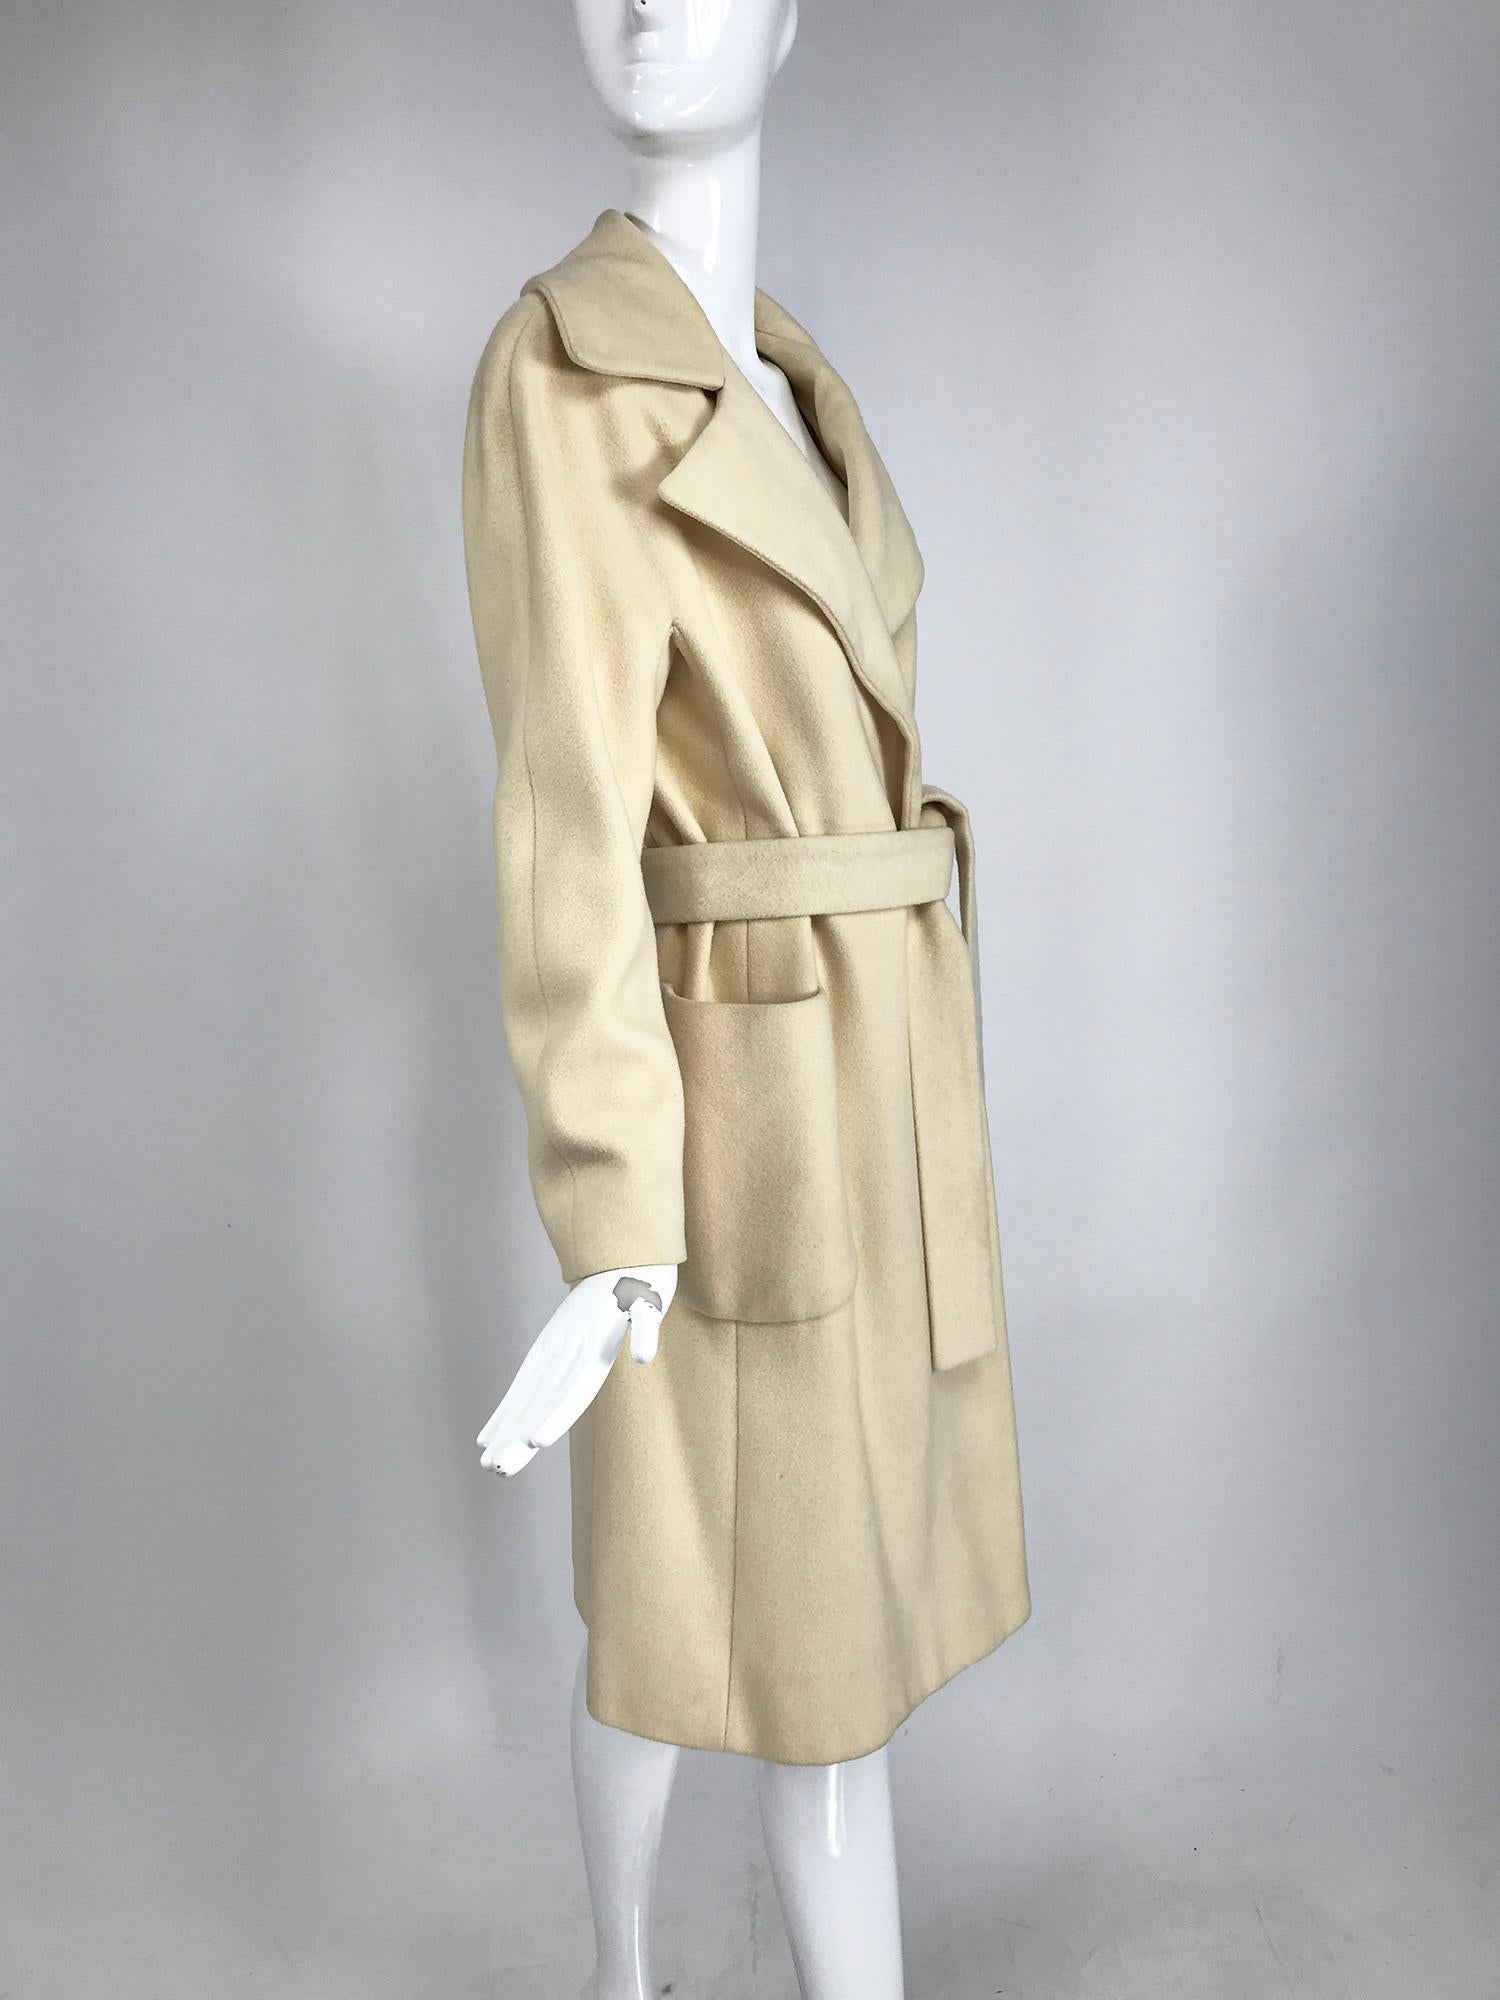 Beige Cream 100% Cashmere Wrap Coat with Patch Pockets 1970s